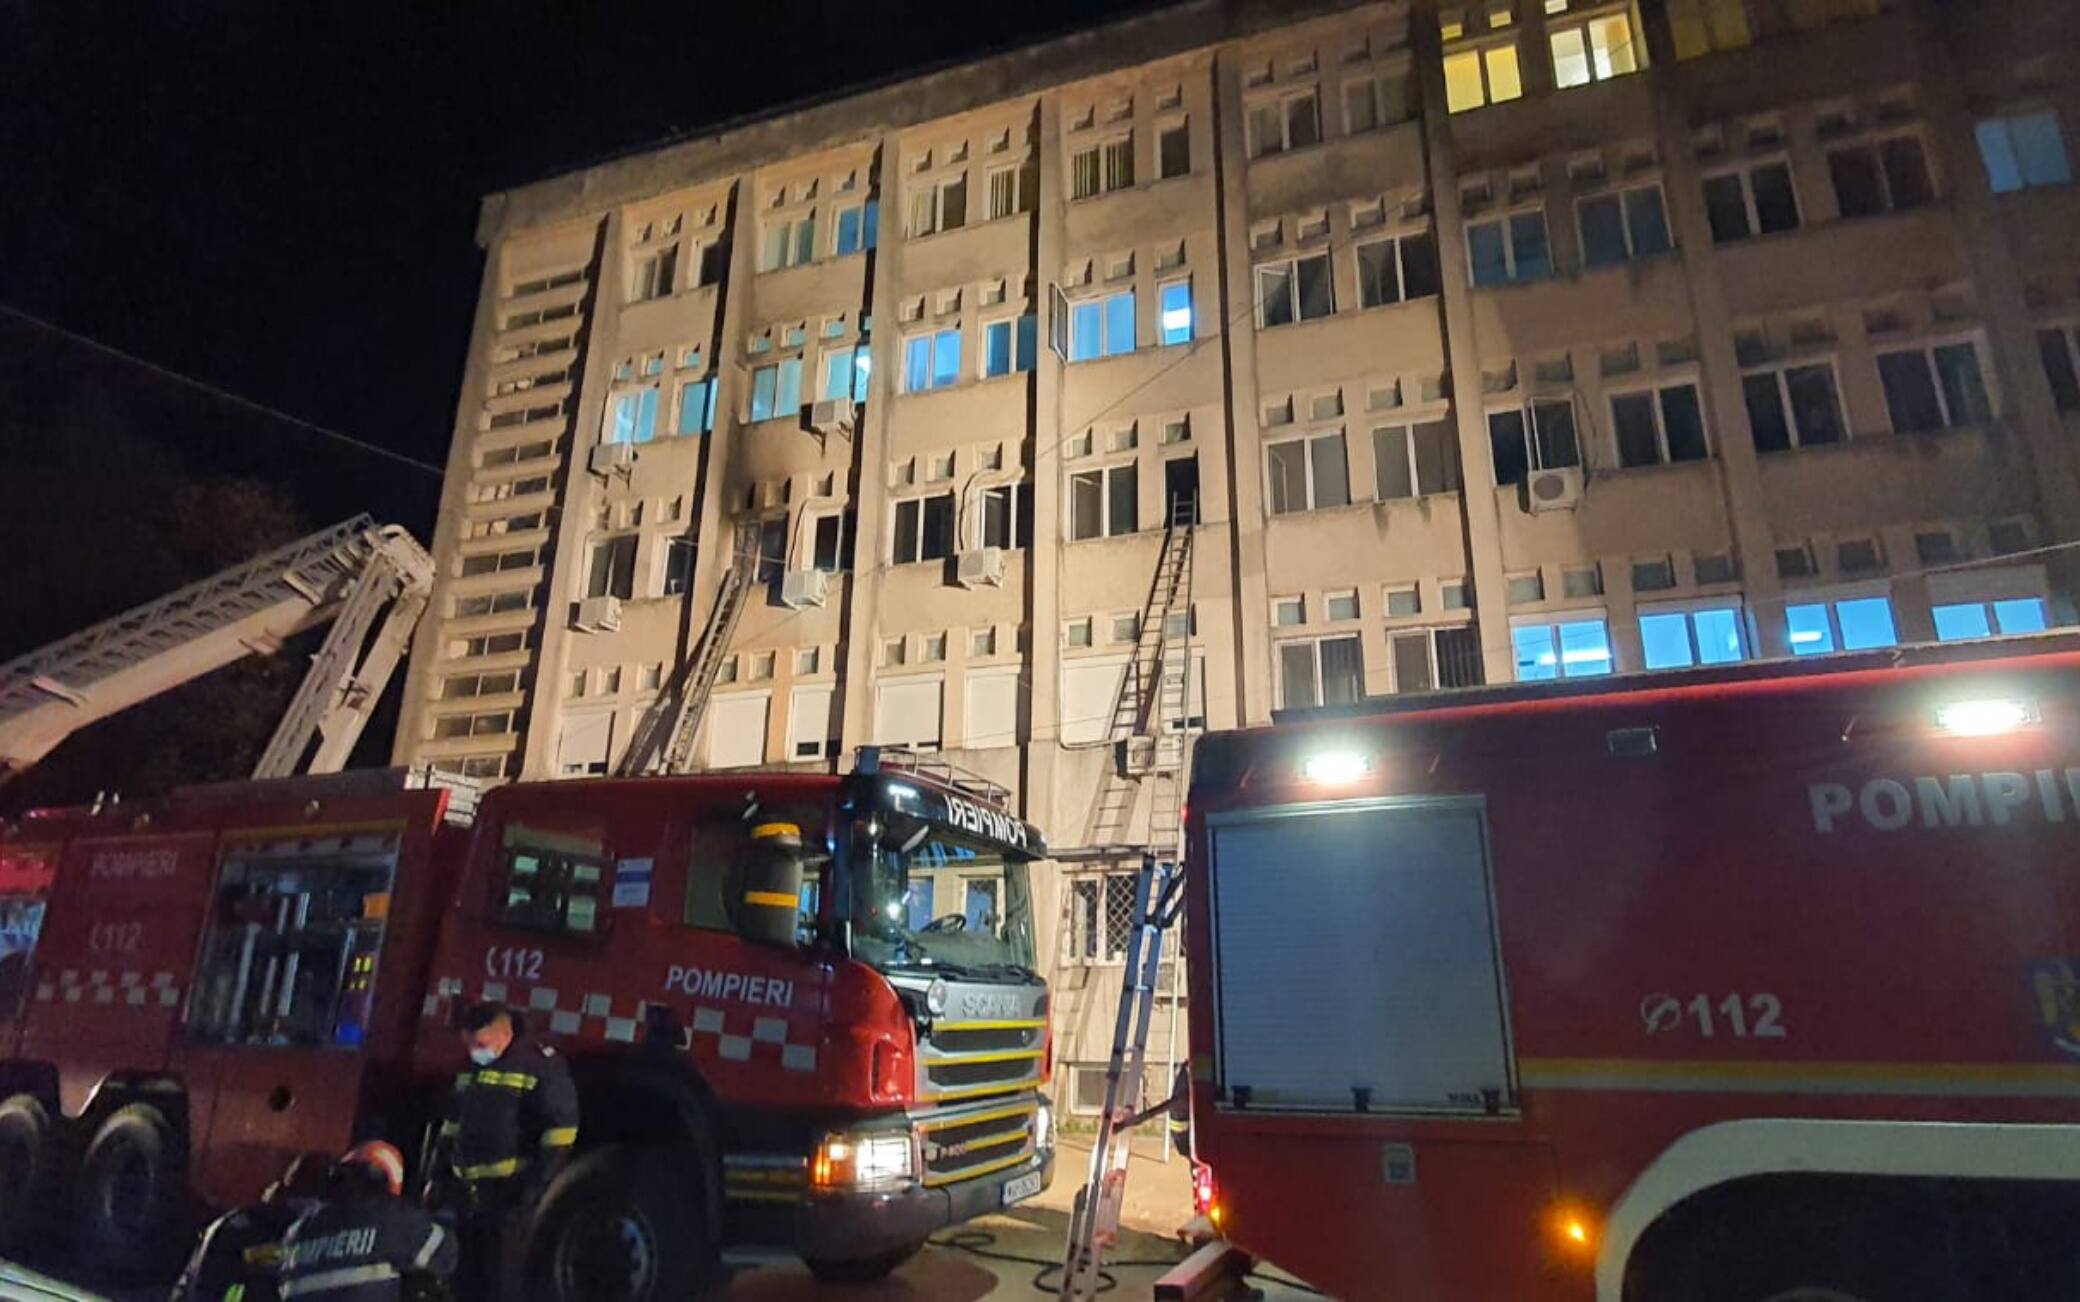 Members of the emergency services work at the scene of a hospital fire where the intensive care unit was burned in Piatra Neamt city, November 14, 2020. - Ten Covid-19 patients were killed when fire broke out at in an intensive care unit in northeast Romania on Saturday, a hospital spokesperson said.
The fire broke out in the early evening in the intensive care of the hospital in the town of Piatra Neamt. (Photo by Robert IOSUB / various sources / AFP) (Photo by ROBERT IOSUB/Ziar Piatra Neamt/AFP via Getty Images)